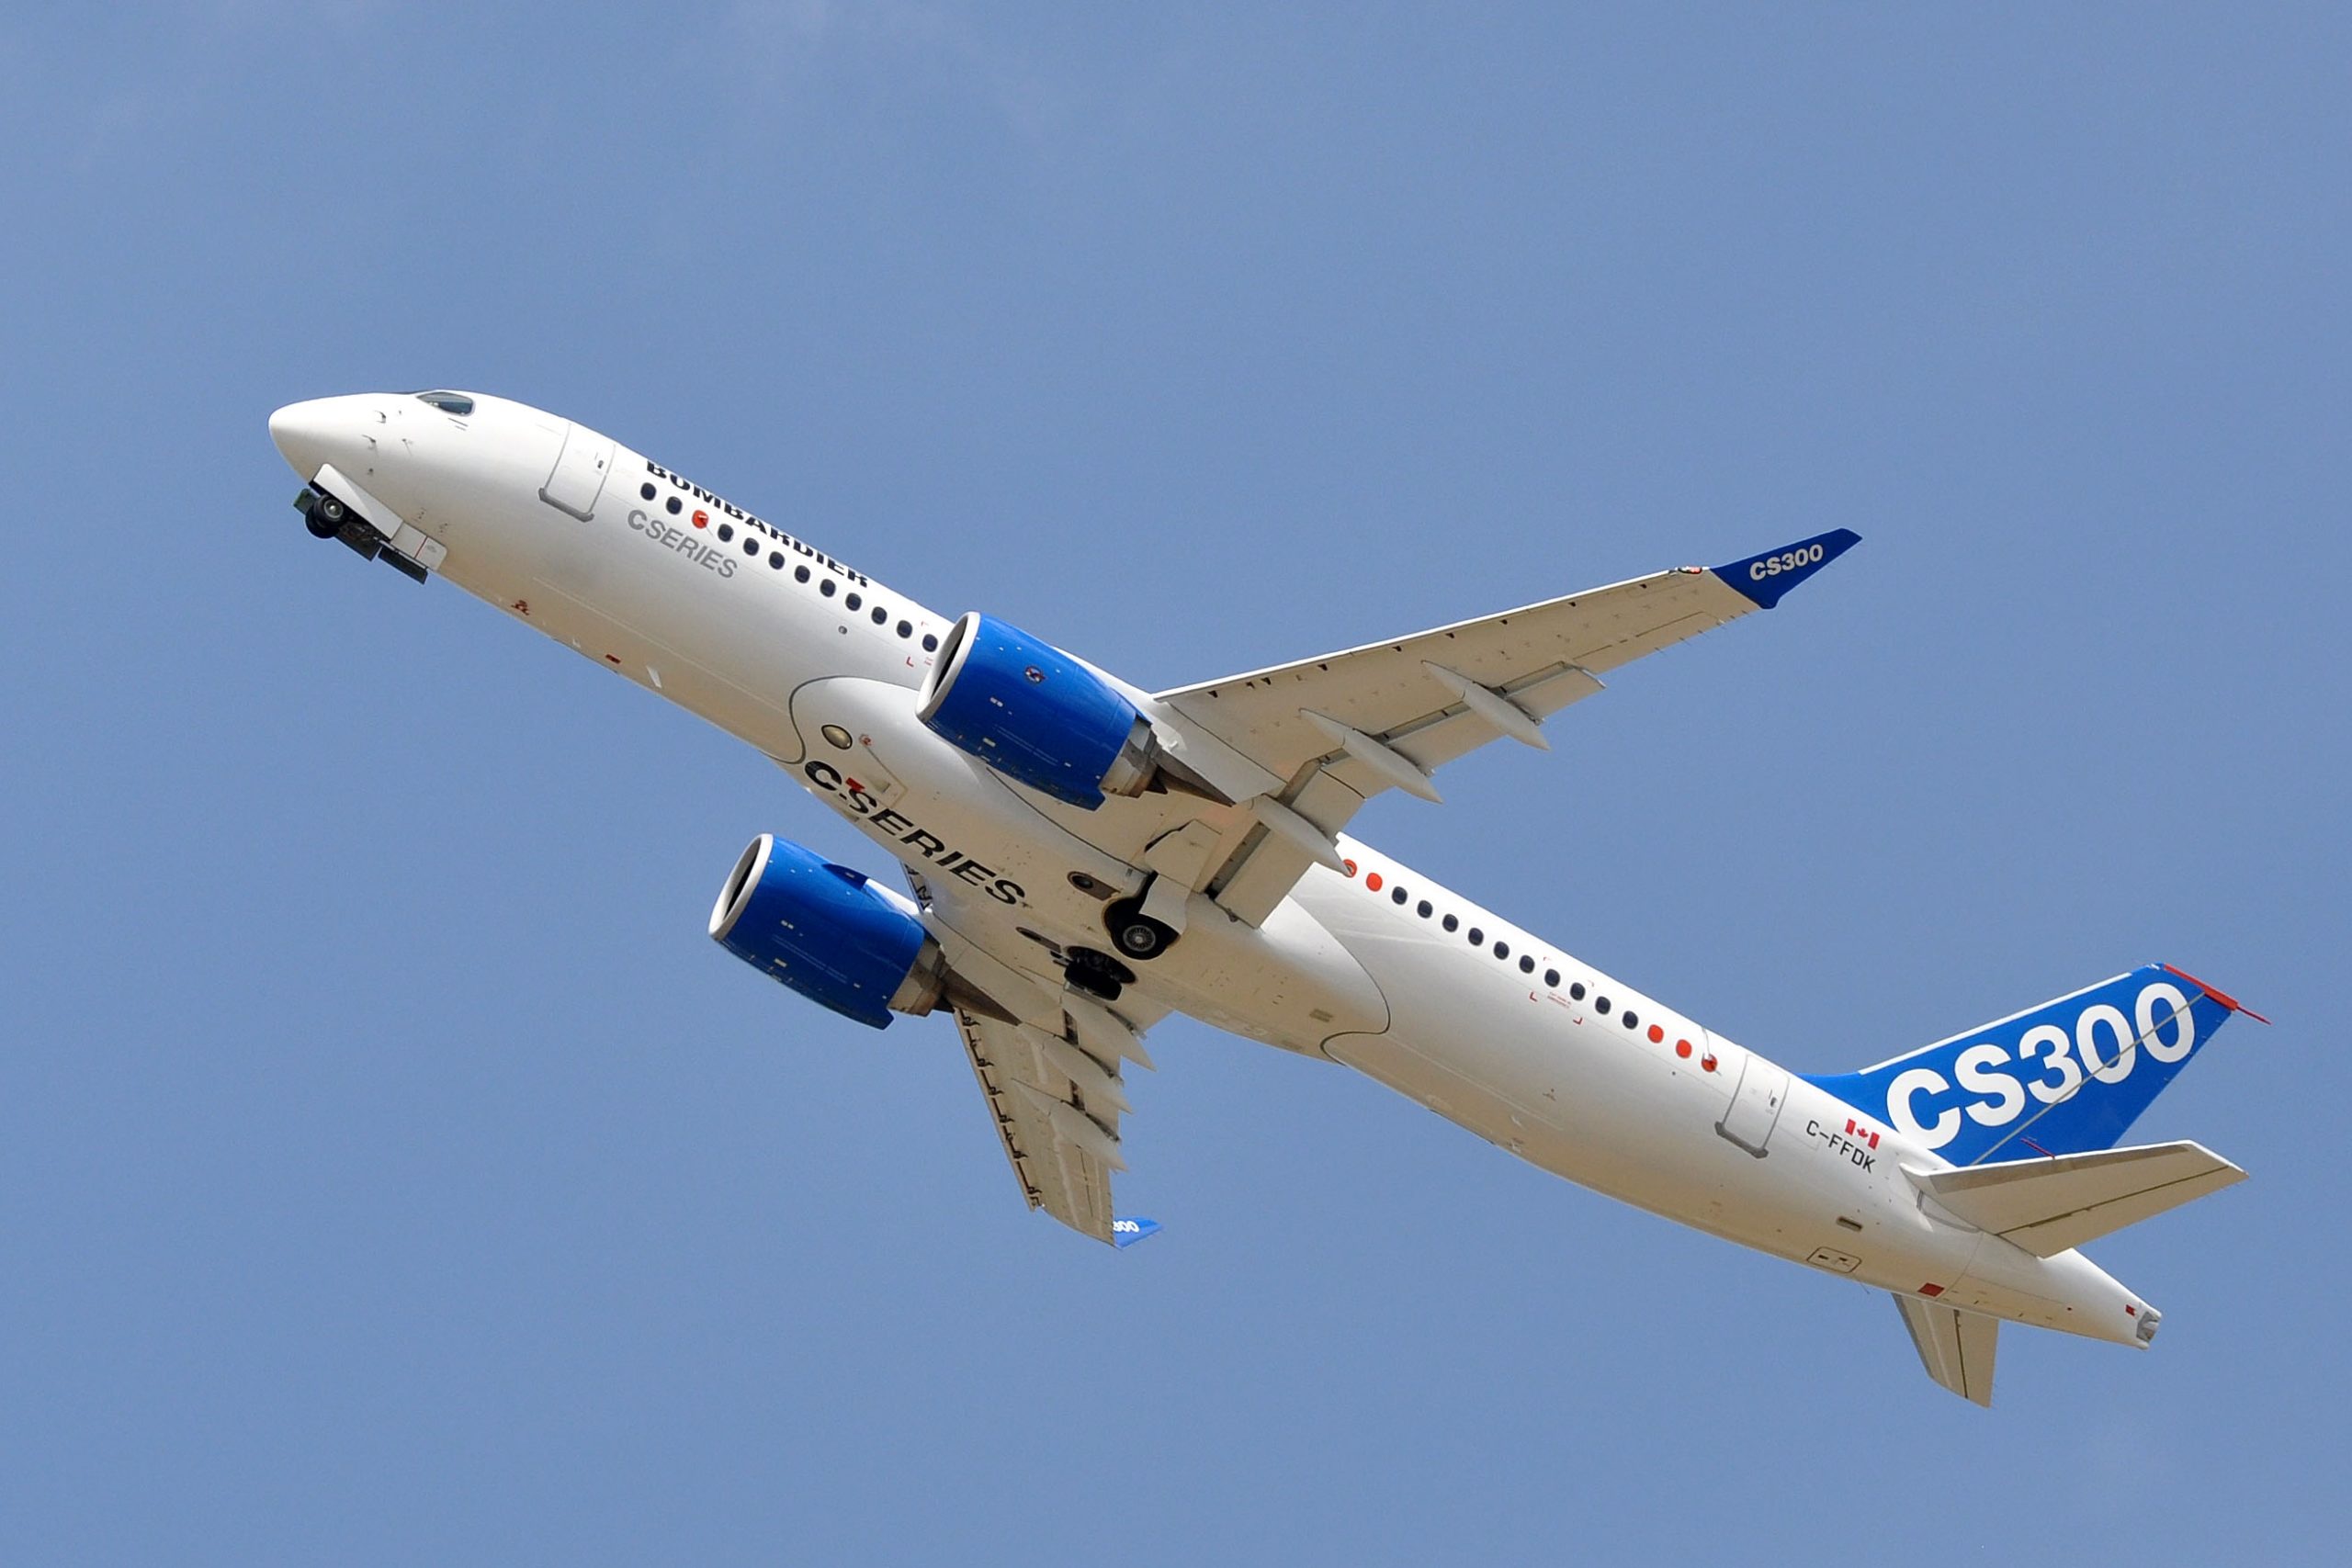 Delta Air Lines' rumored deal could be a major coup for Bombardier. Image: Eric Salard 